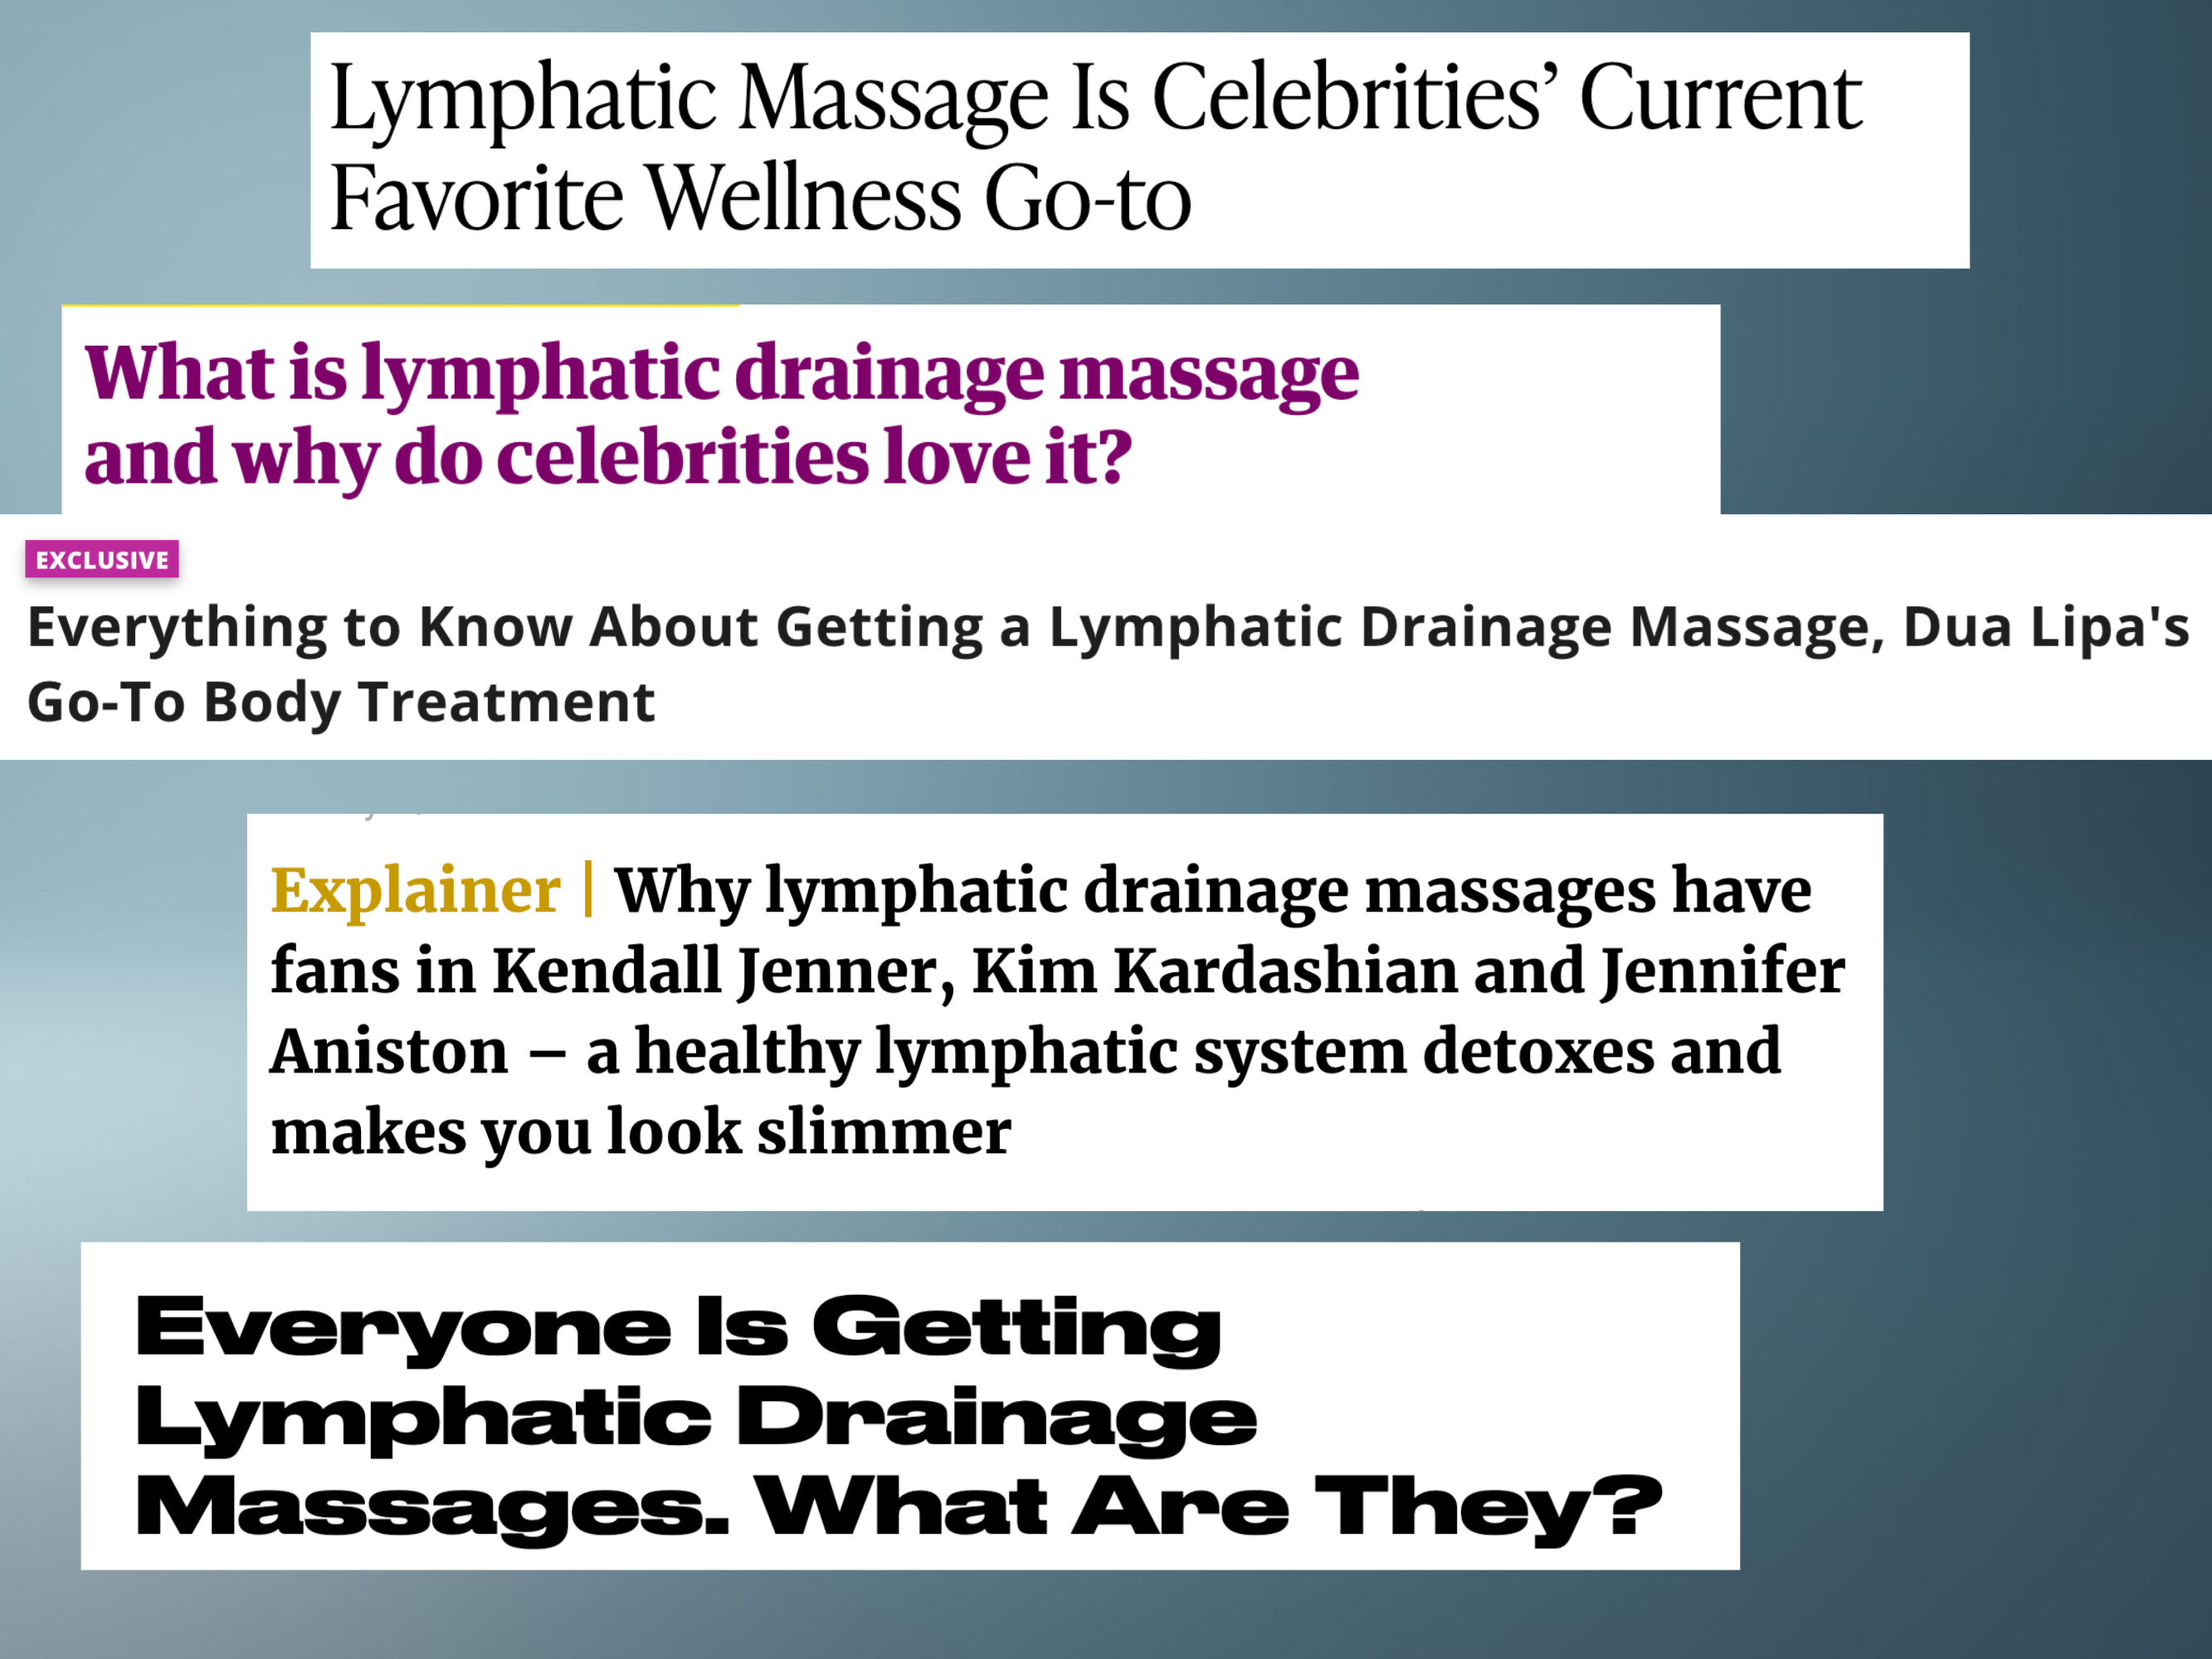 Gradient background transitioning from light to dark with various headlines about lymphatic drainage massages